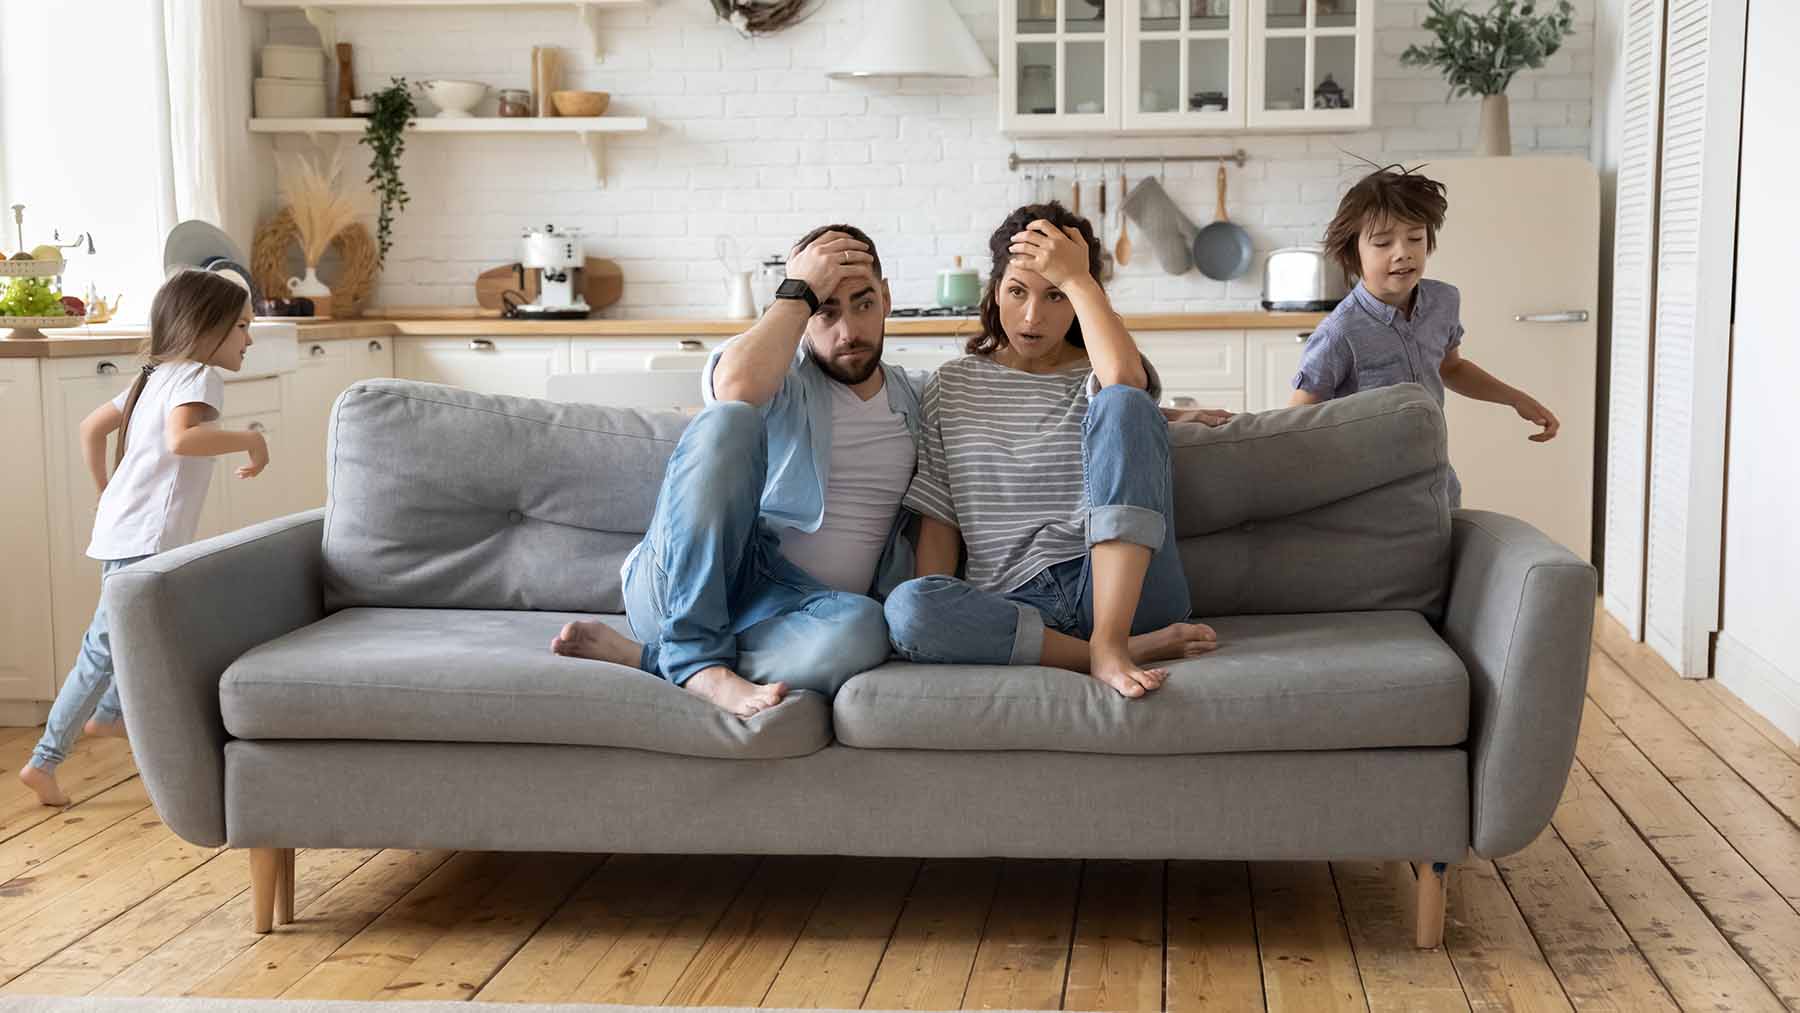 Stressed parents on couch, kids run wild